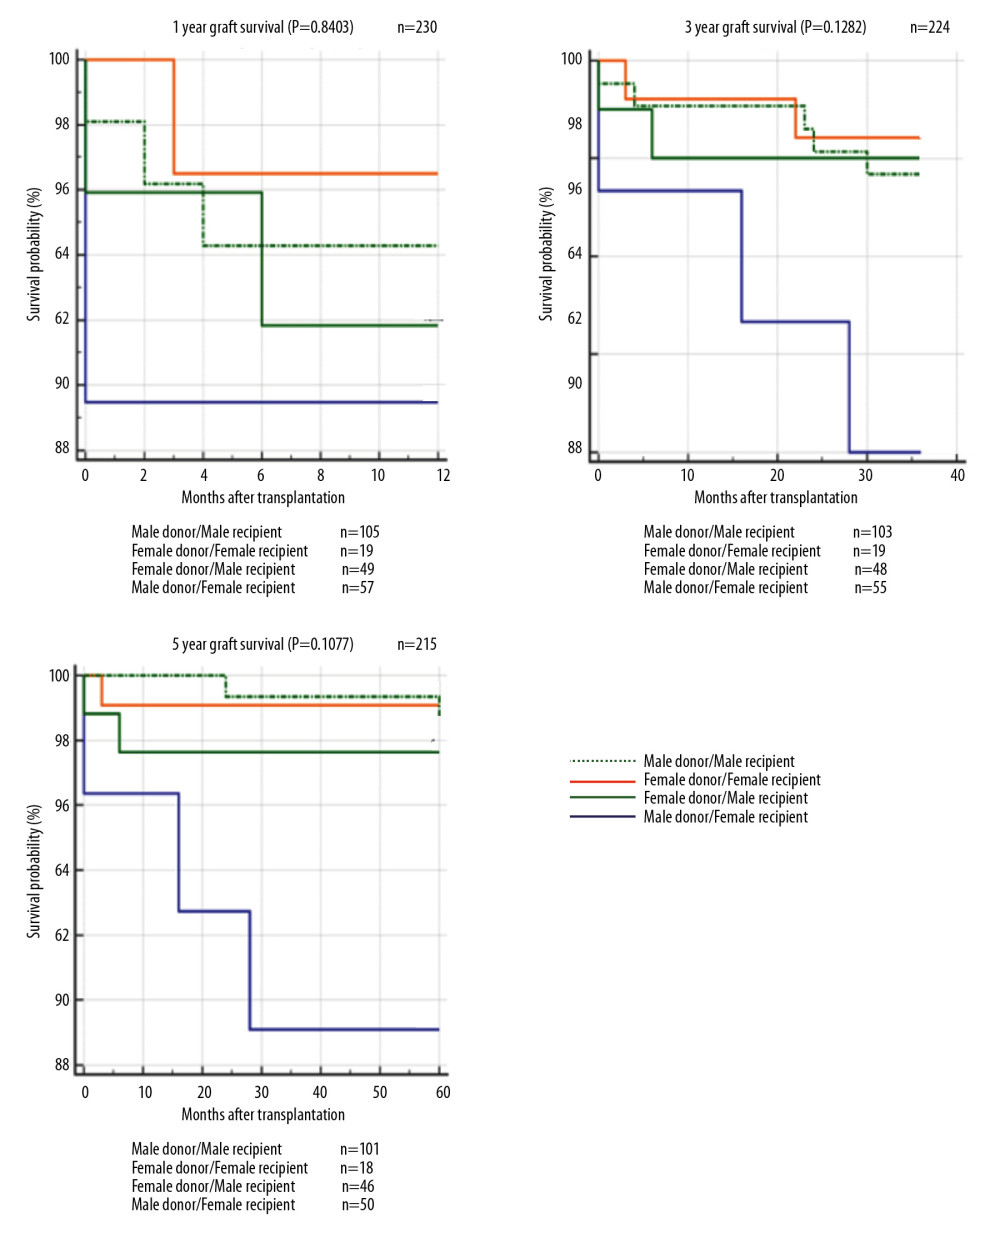 The 1-year, 3-year, and 5-year patient survival after kidney transplantation.